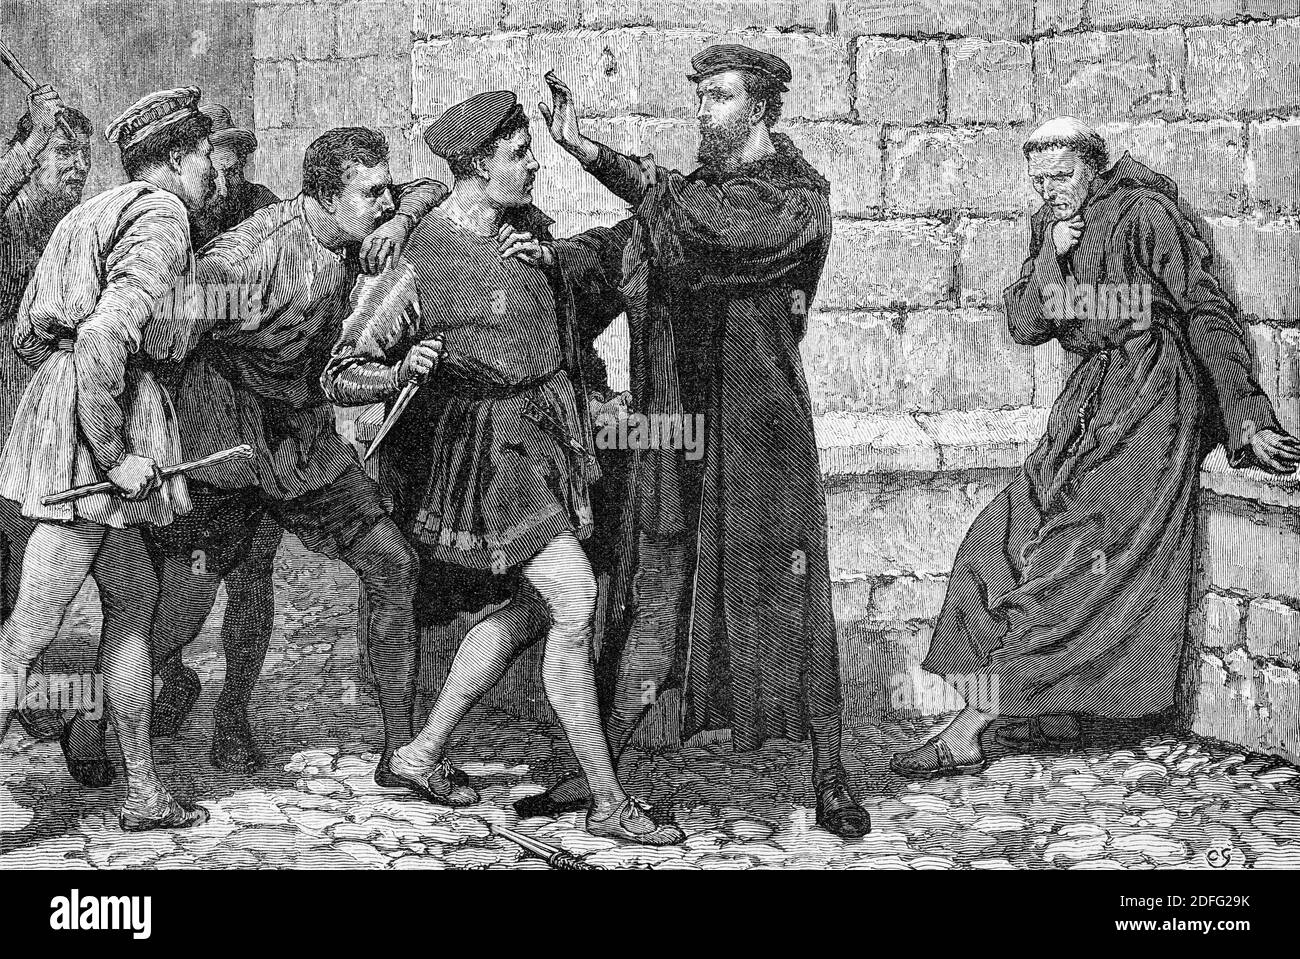 Engraving of George Wishart (1513-1546) Scottish religious reformer and Protestant martyr, protecting his would-be assassin. Illustration from 'The history of Protestantism' by James Aitken Wylie (1808-1890), pub. 1878 Stock Photo